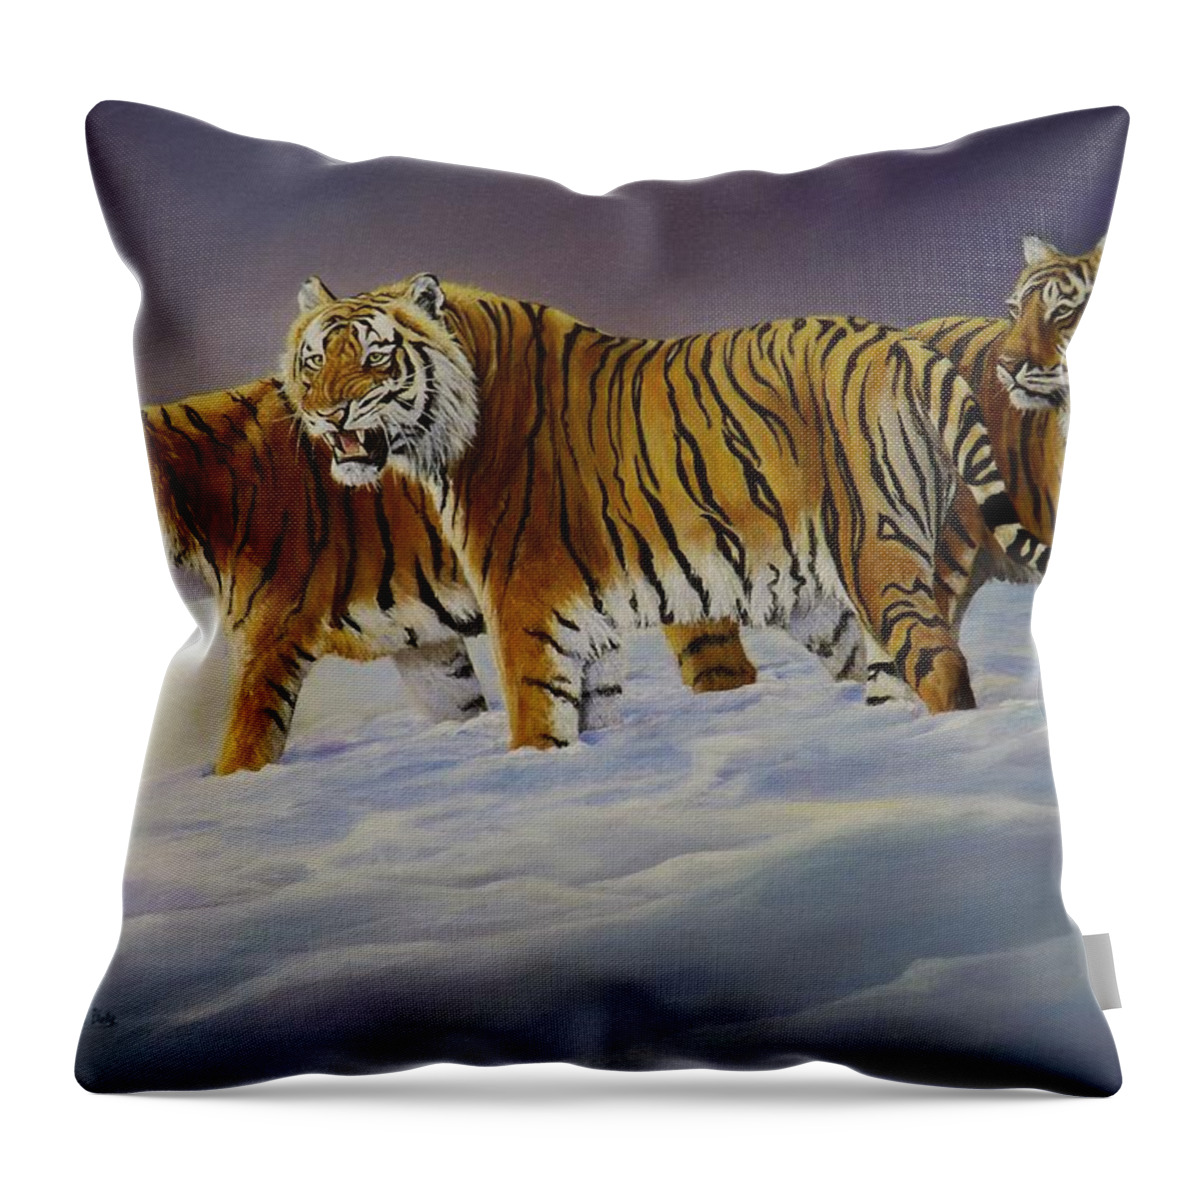 Tiger Throw Pillow featuring the painting Siberian Sunlight by Barry BLAKE